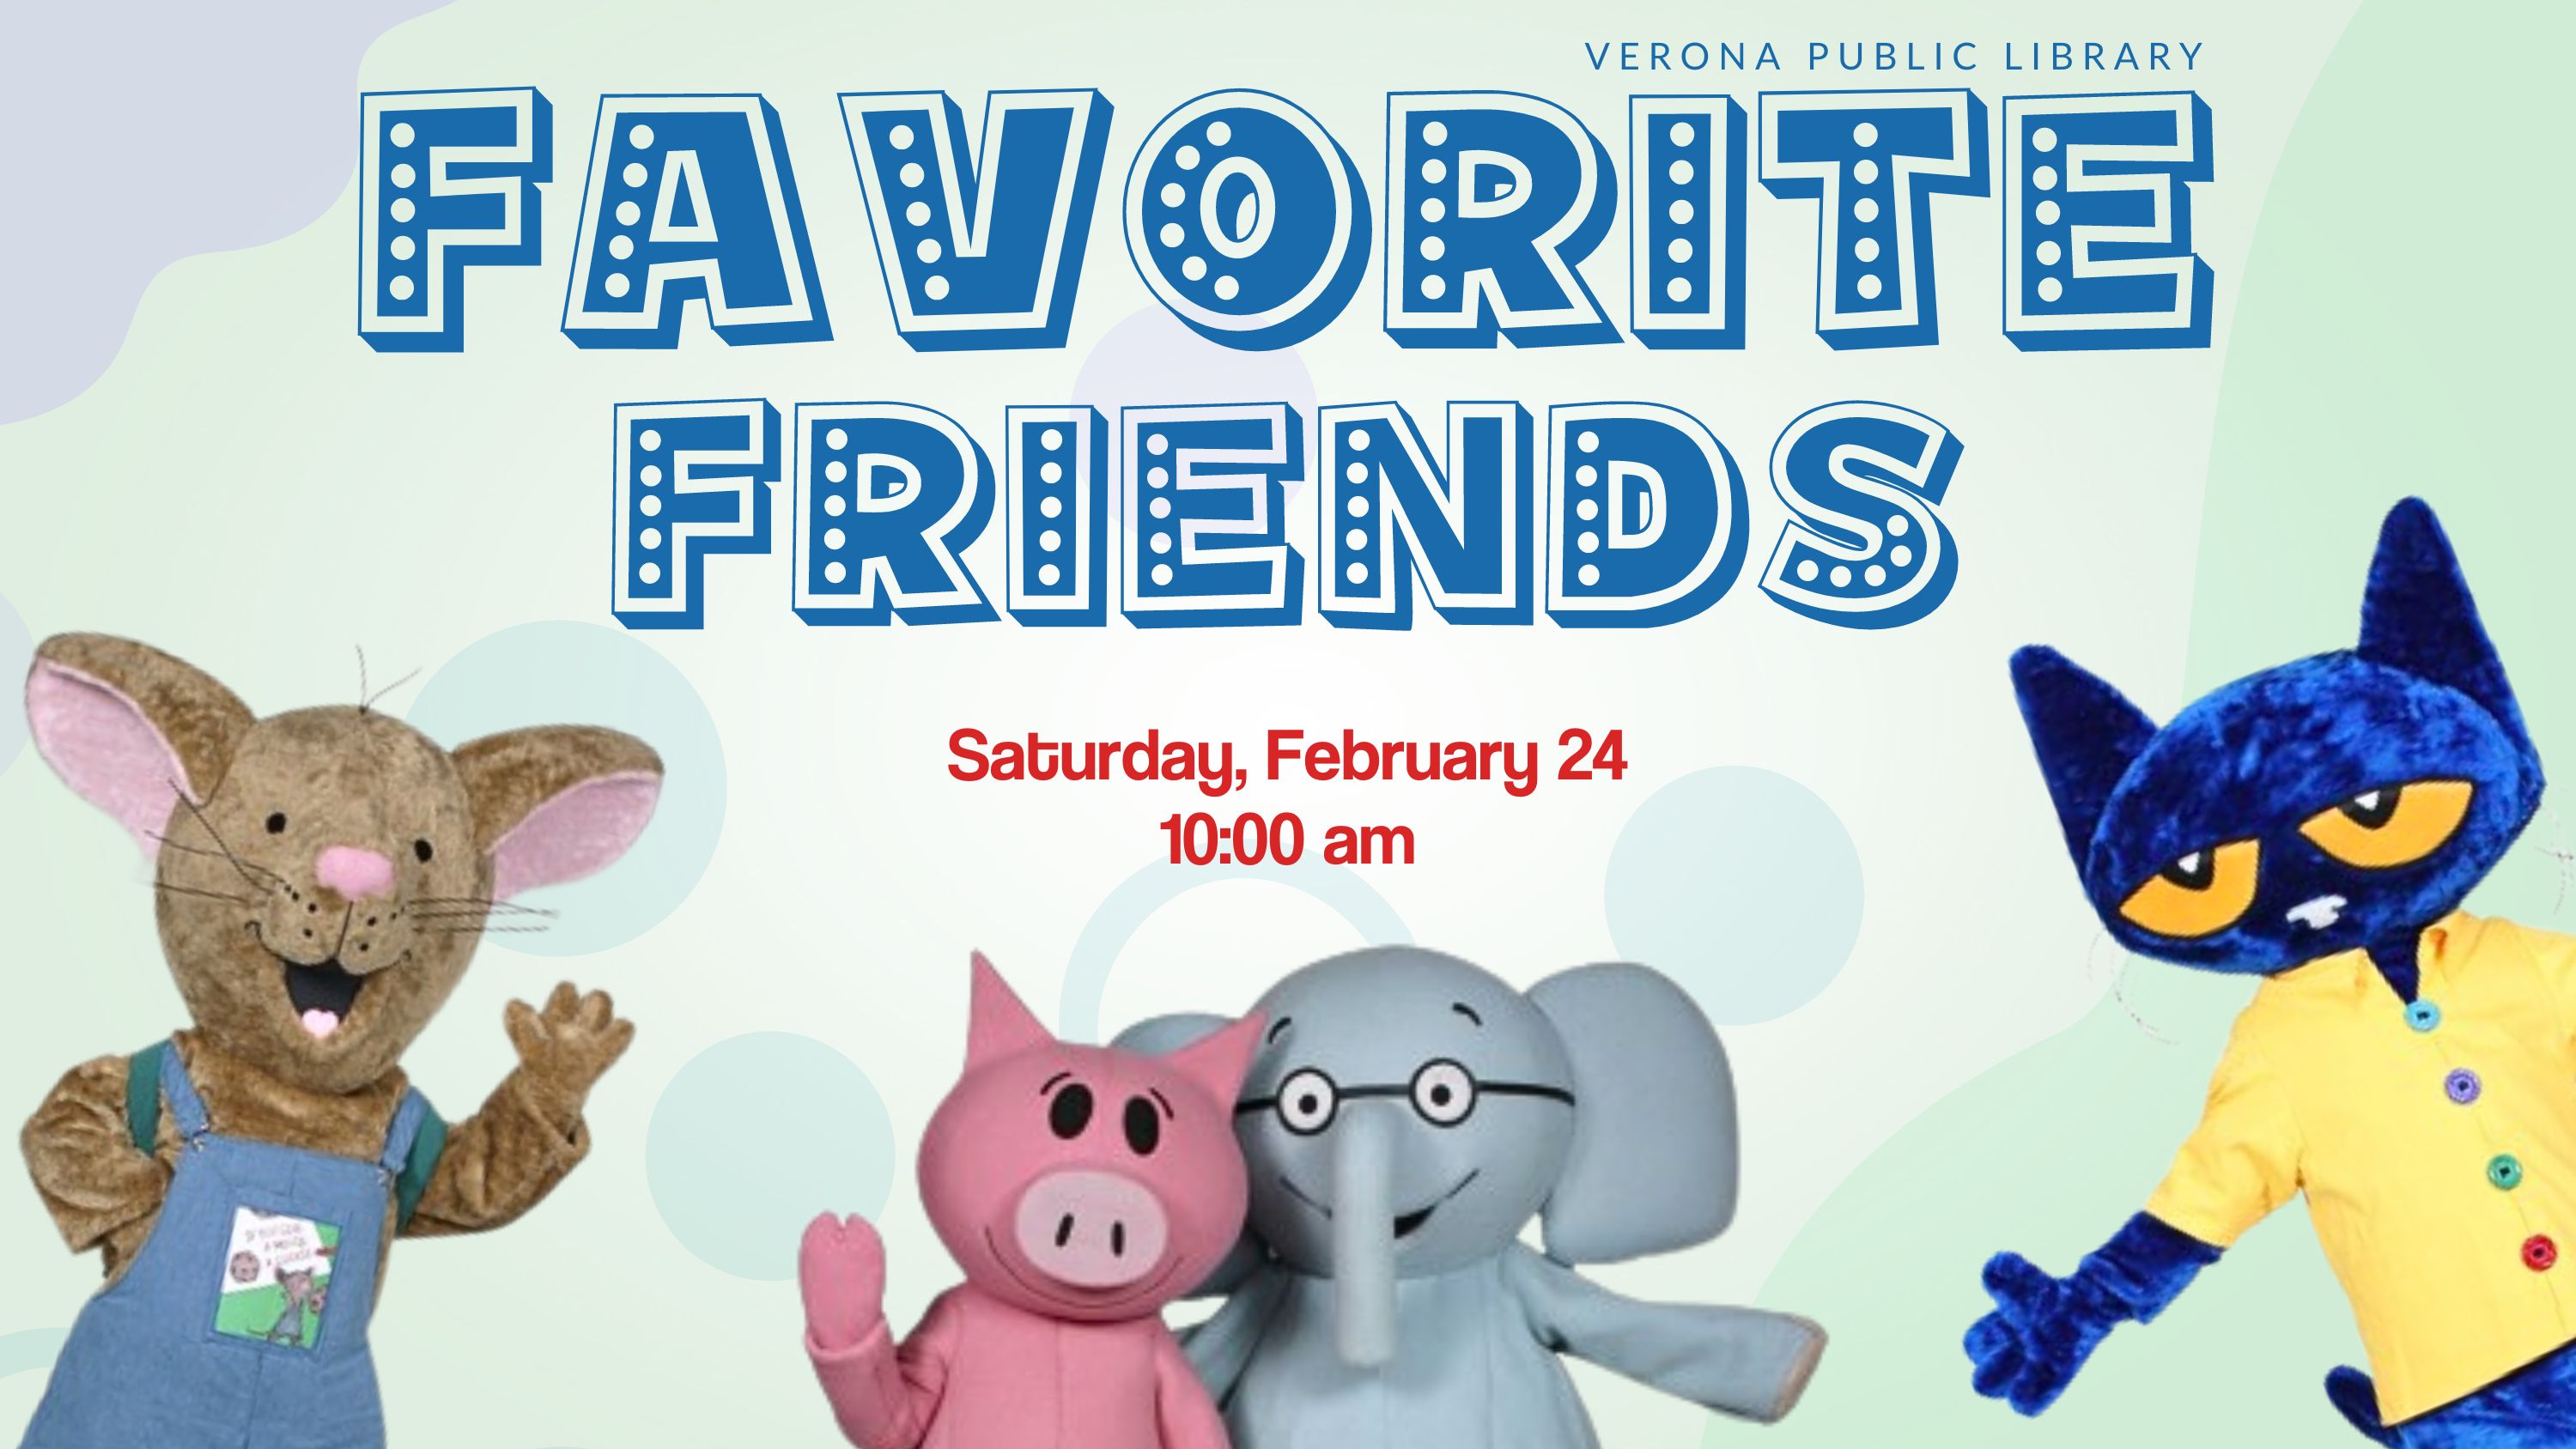 "Favorite Friends" text with image of cookie mouse, elephant and piggie, and Pete the cat costumes